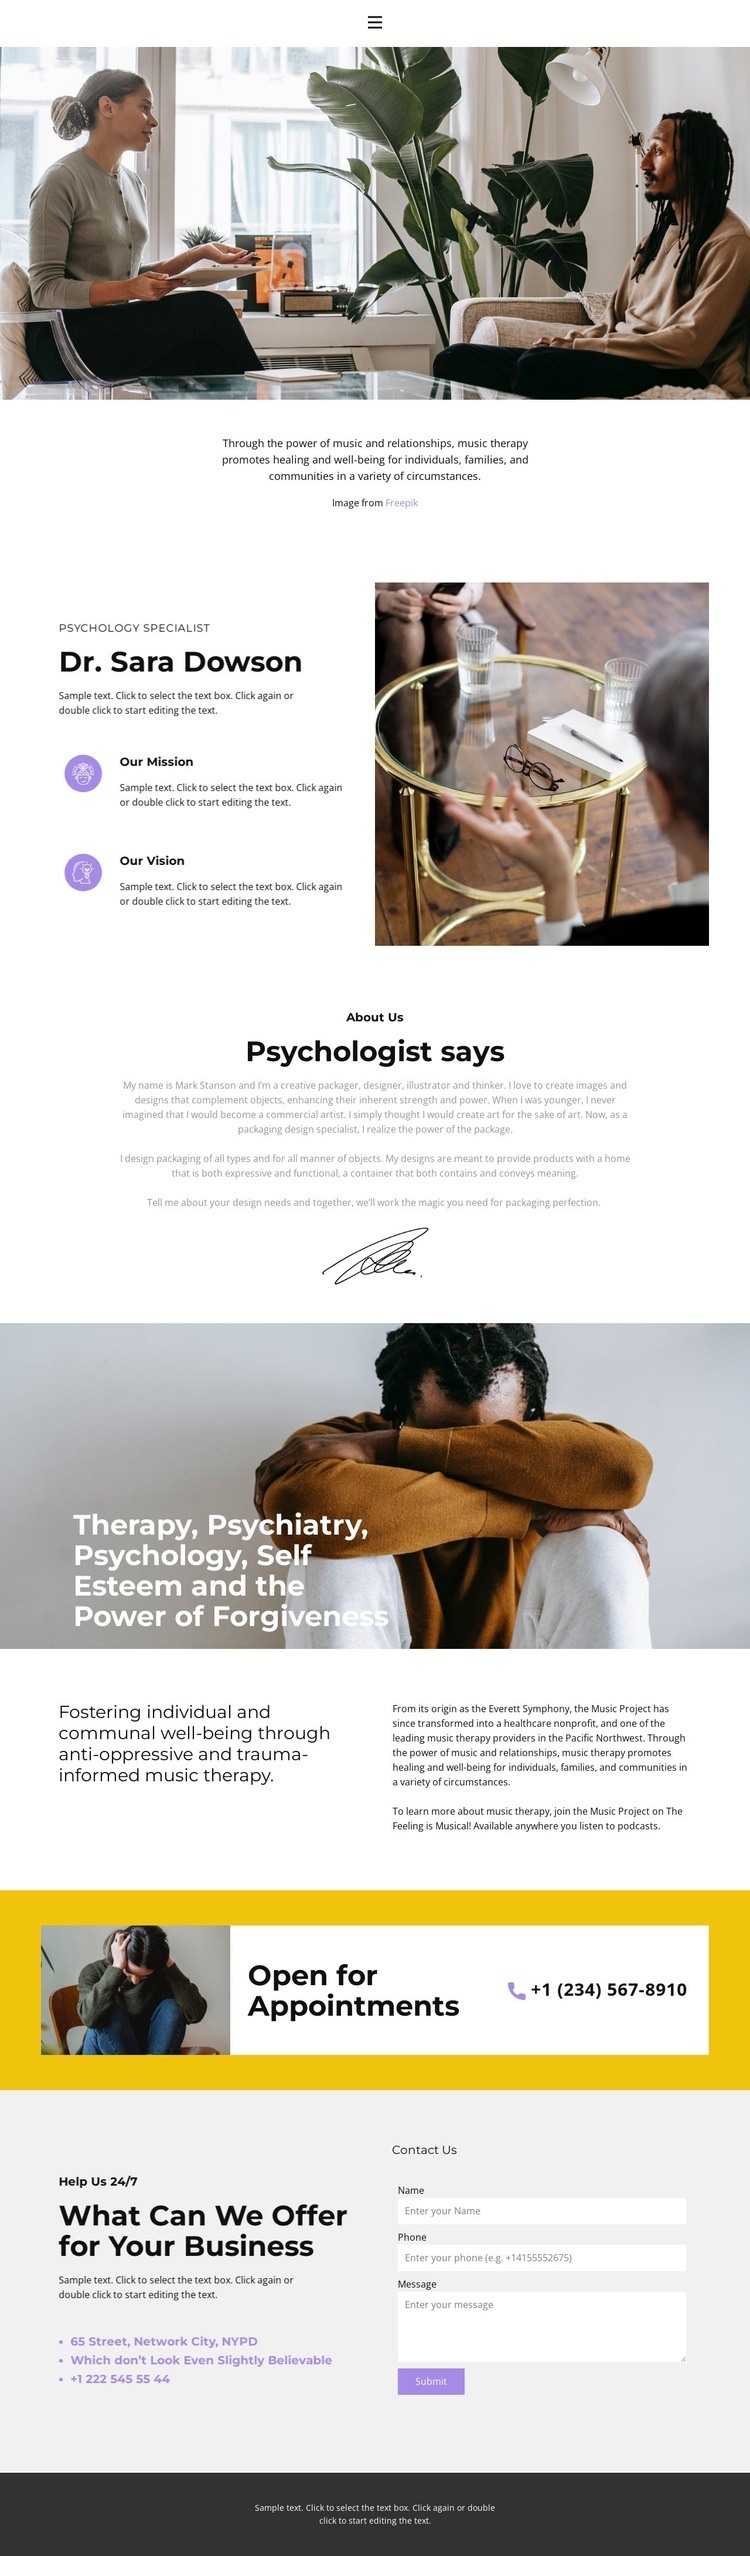 Qualified help from a psychologist Homepage Design